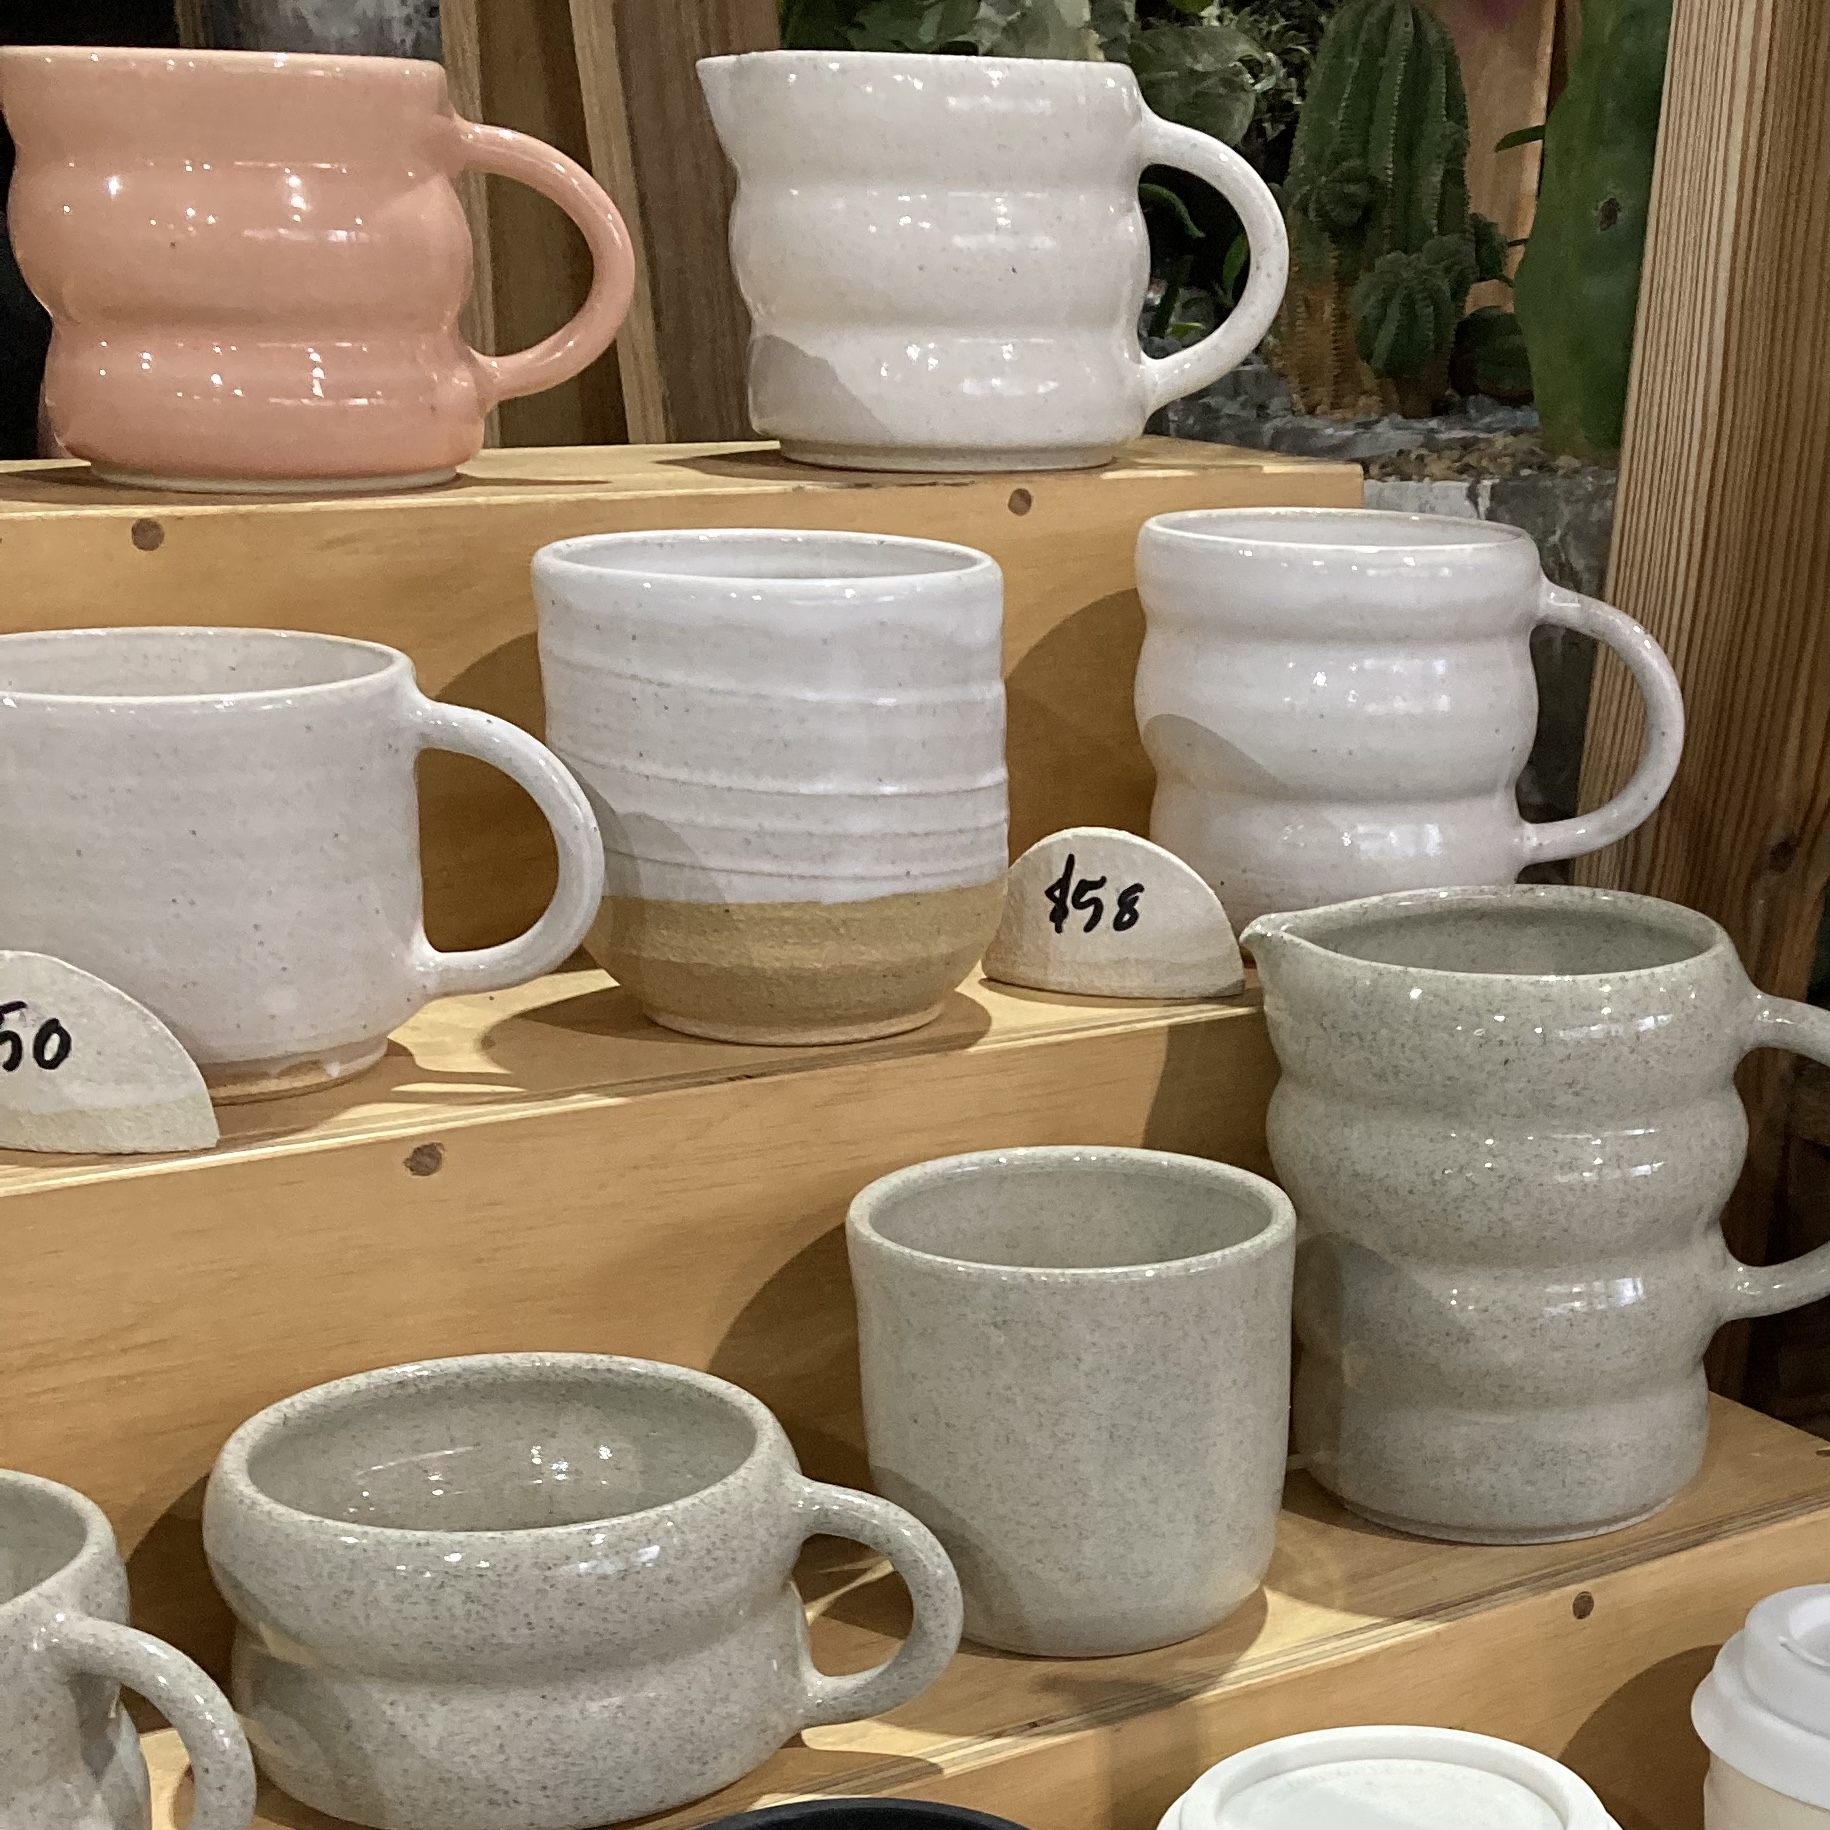 Ceramic homeware mugs. Shaped in a circular design. White, pink and grey in colour. 